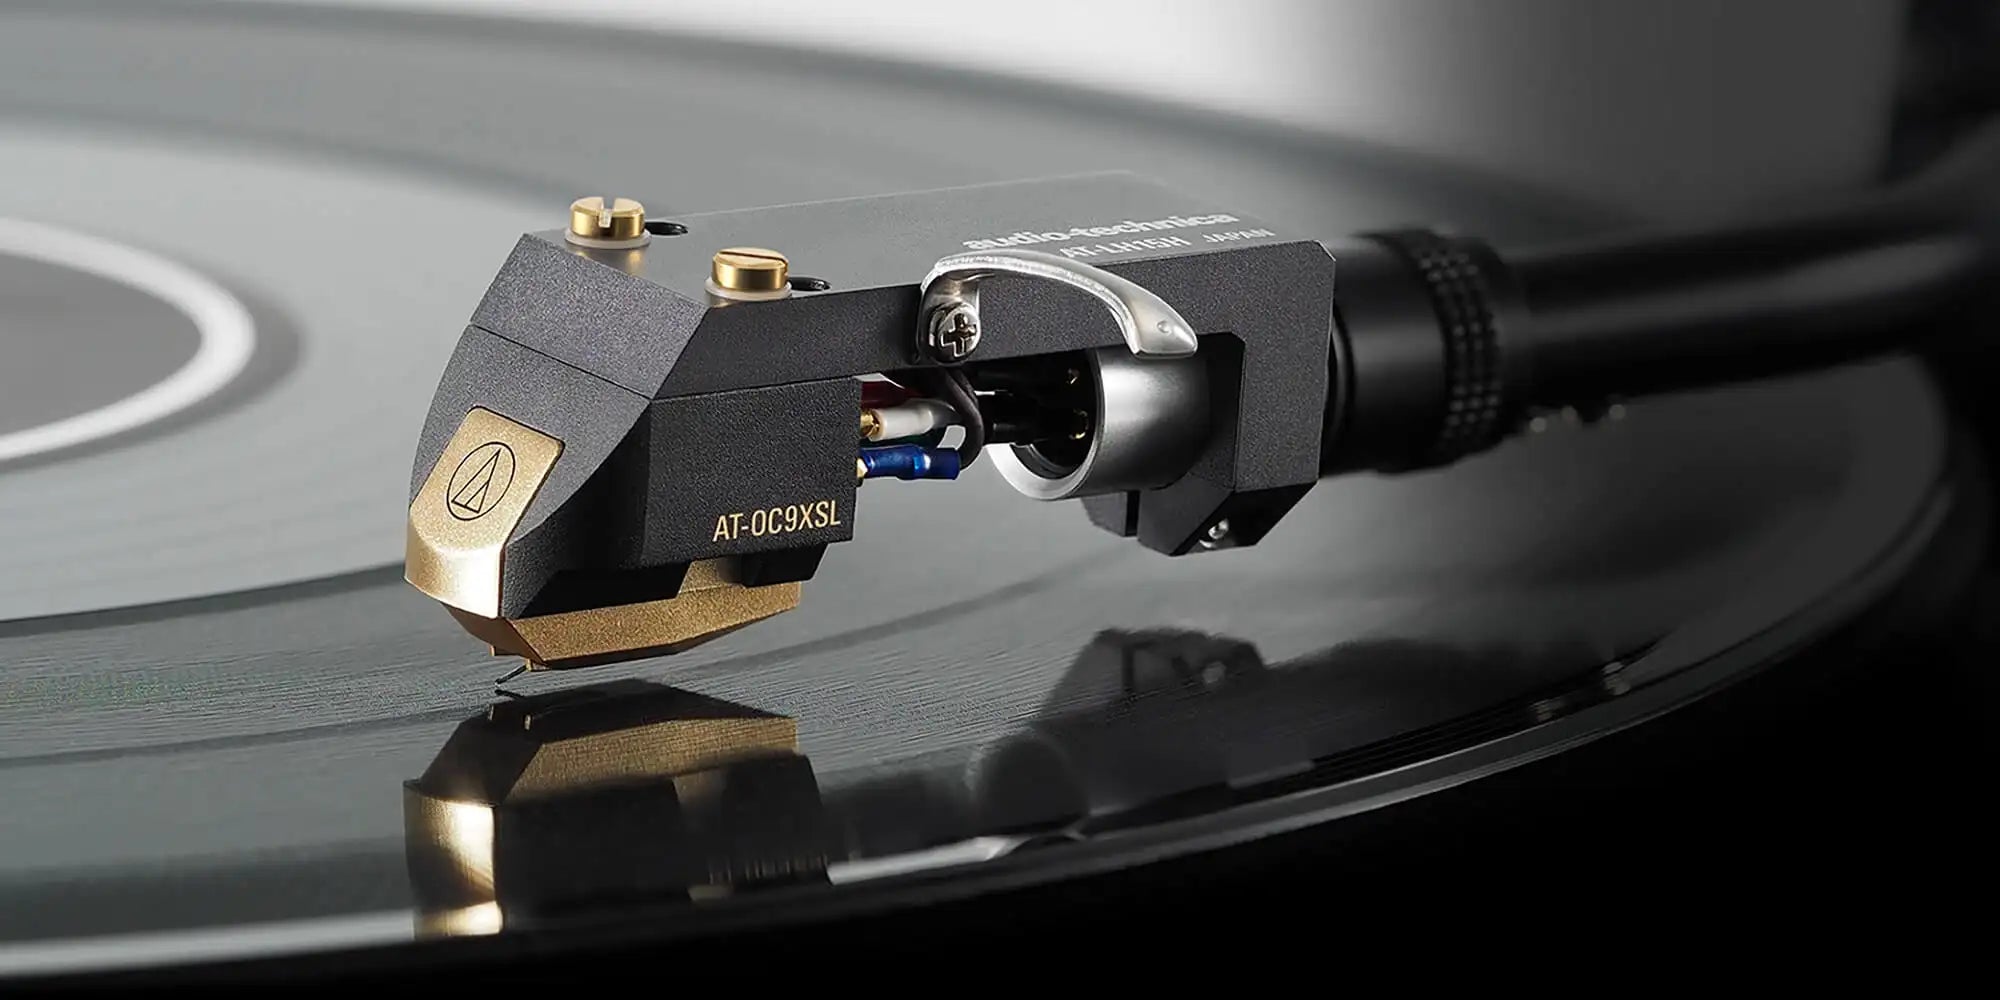 Audio Technica Cartridges - What they do and which one is right for me?